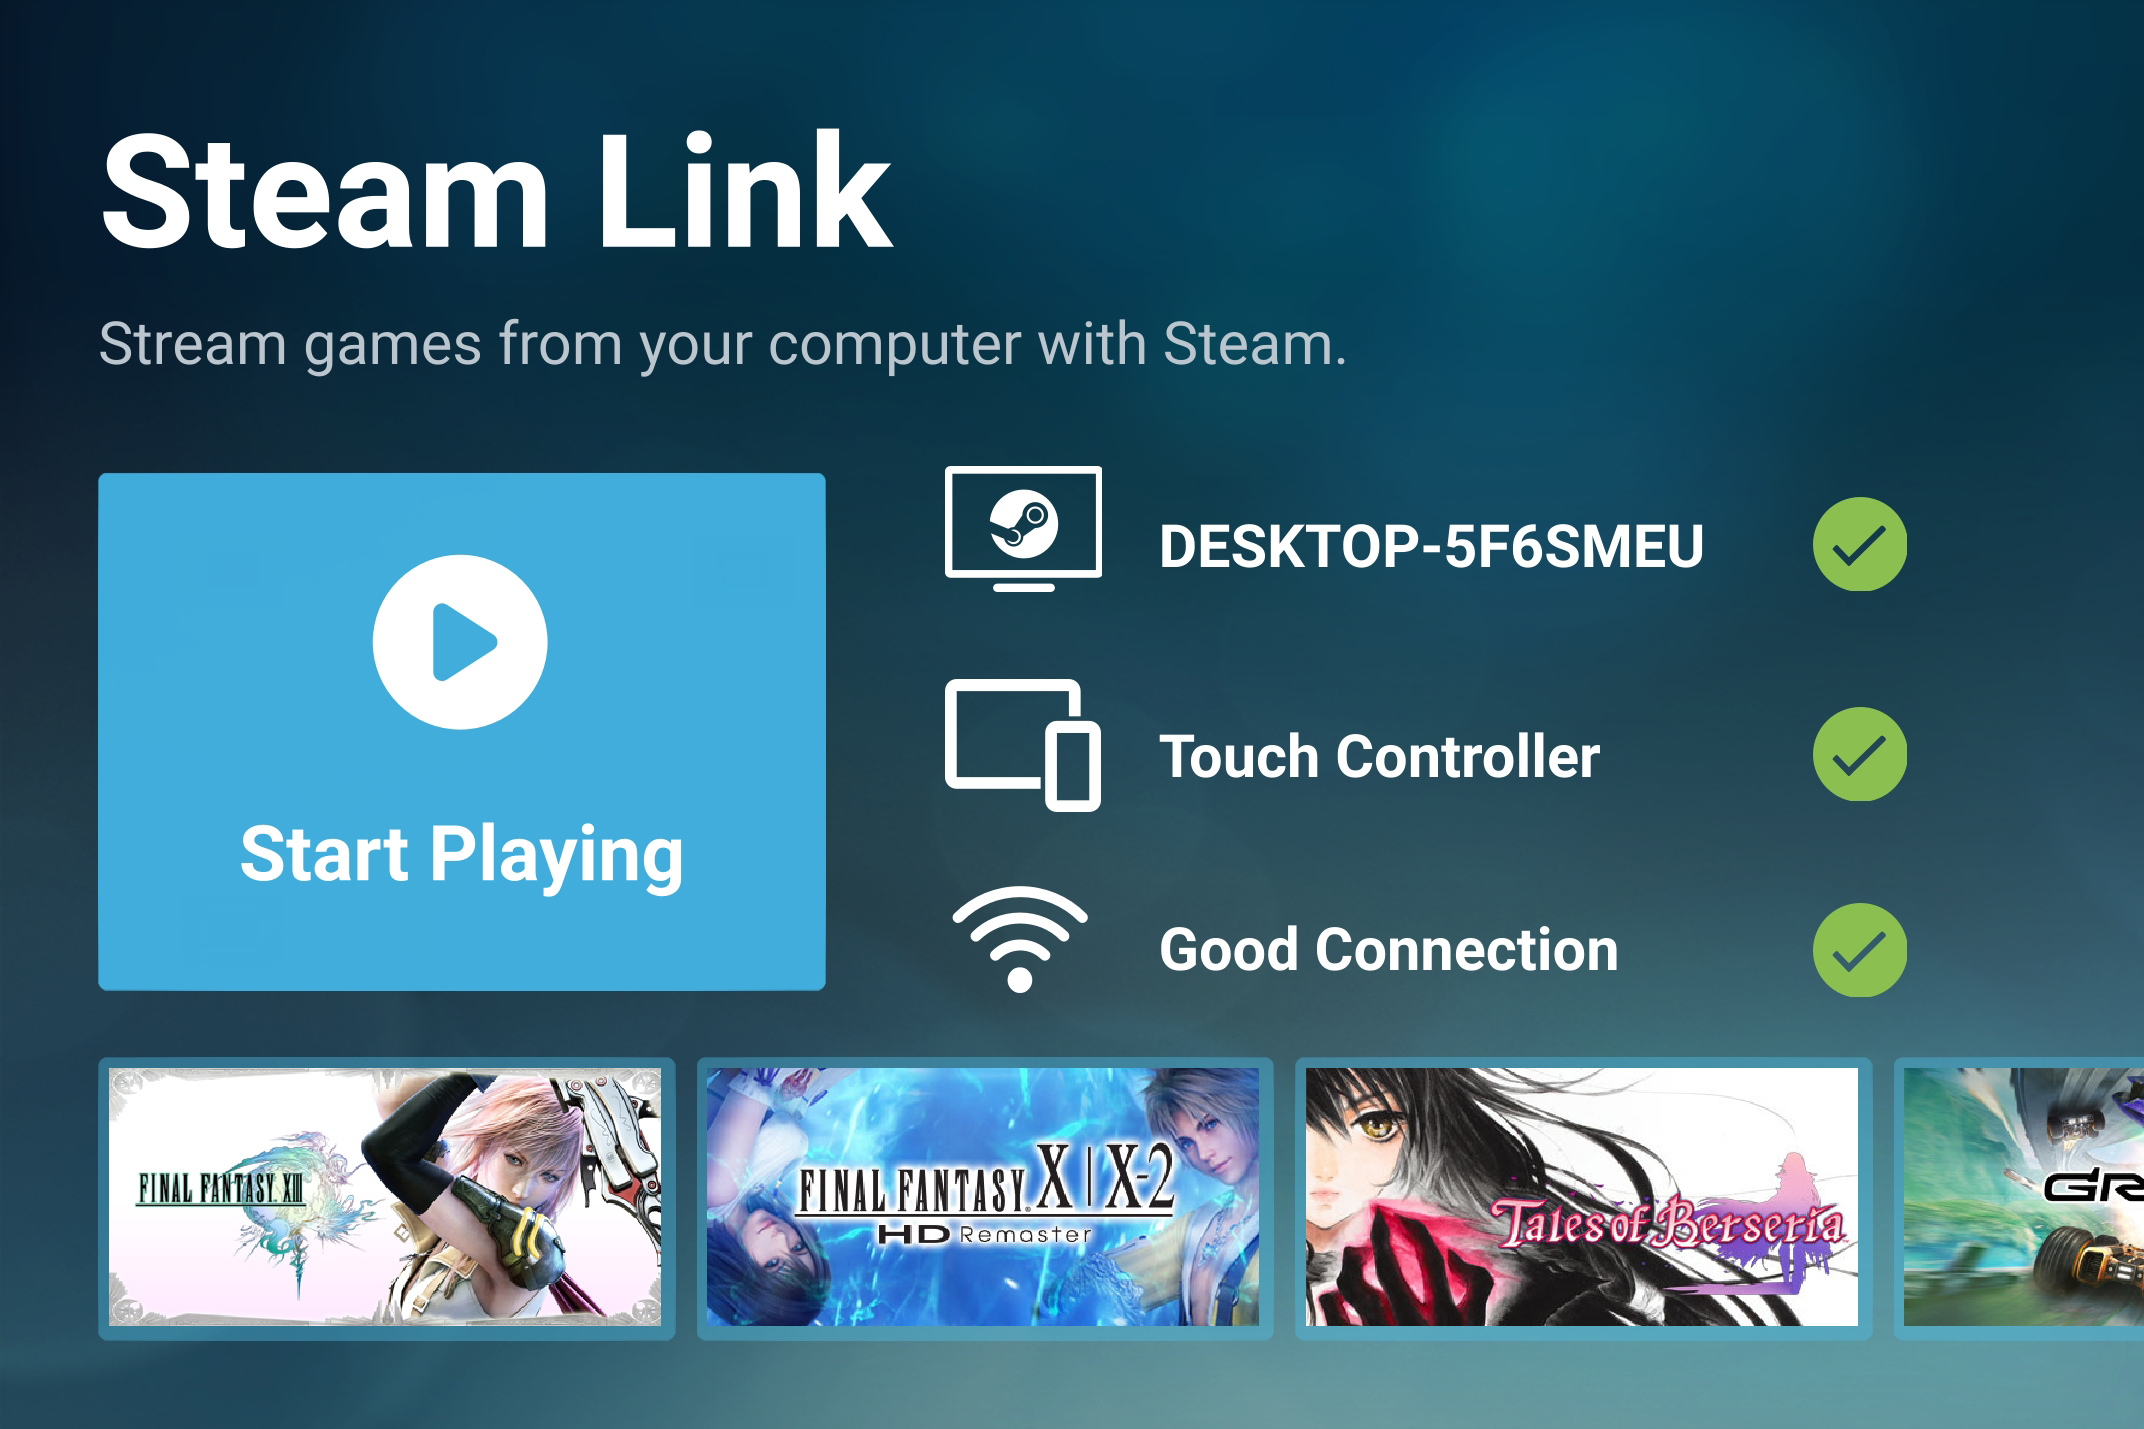 How to install multiple instances of a Game in Steam